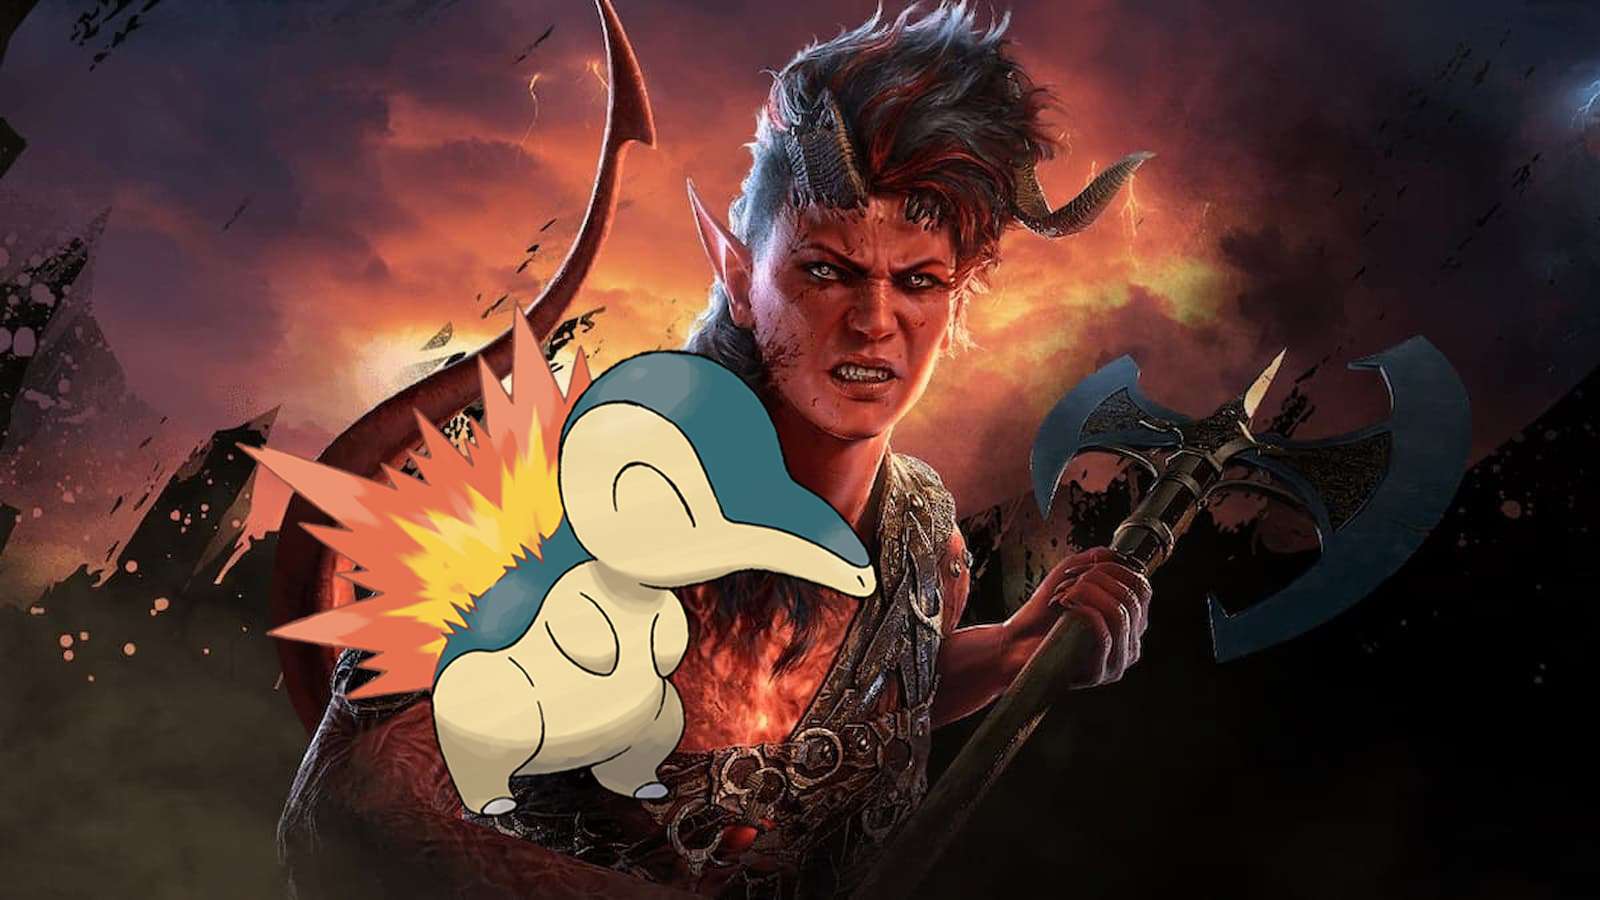 Karlach with a Cyndaquil from Pokemon in Baldur's Gate 3